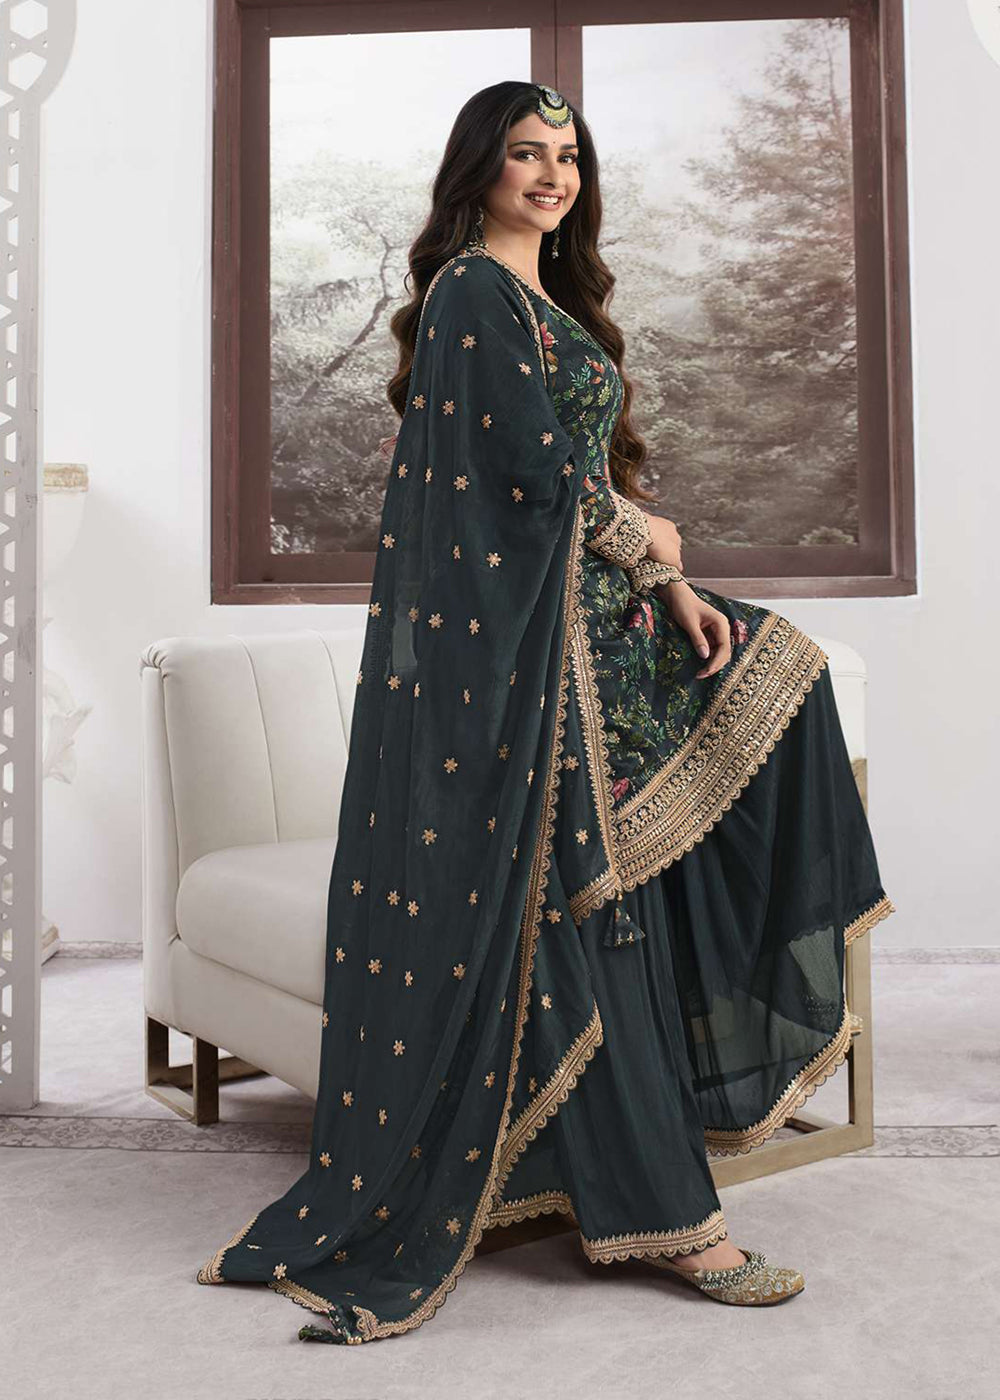 Shop Now Prachi Desai Teal Green Silk Georgette Embroidered Sharara Suit Online at Empress Clothing in USA, UK, Canada, Italy & Worldwide.